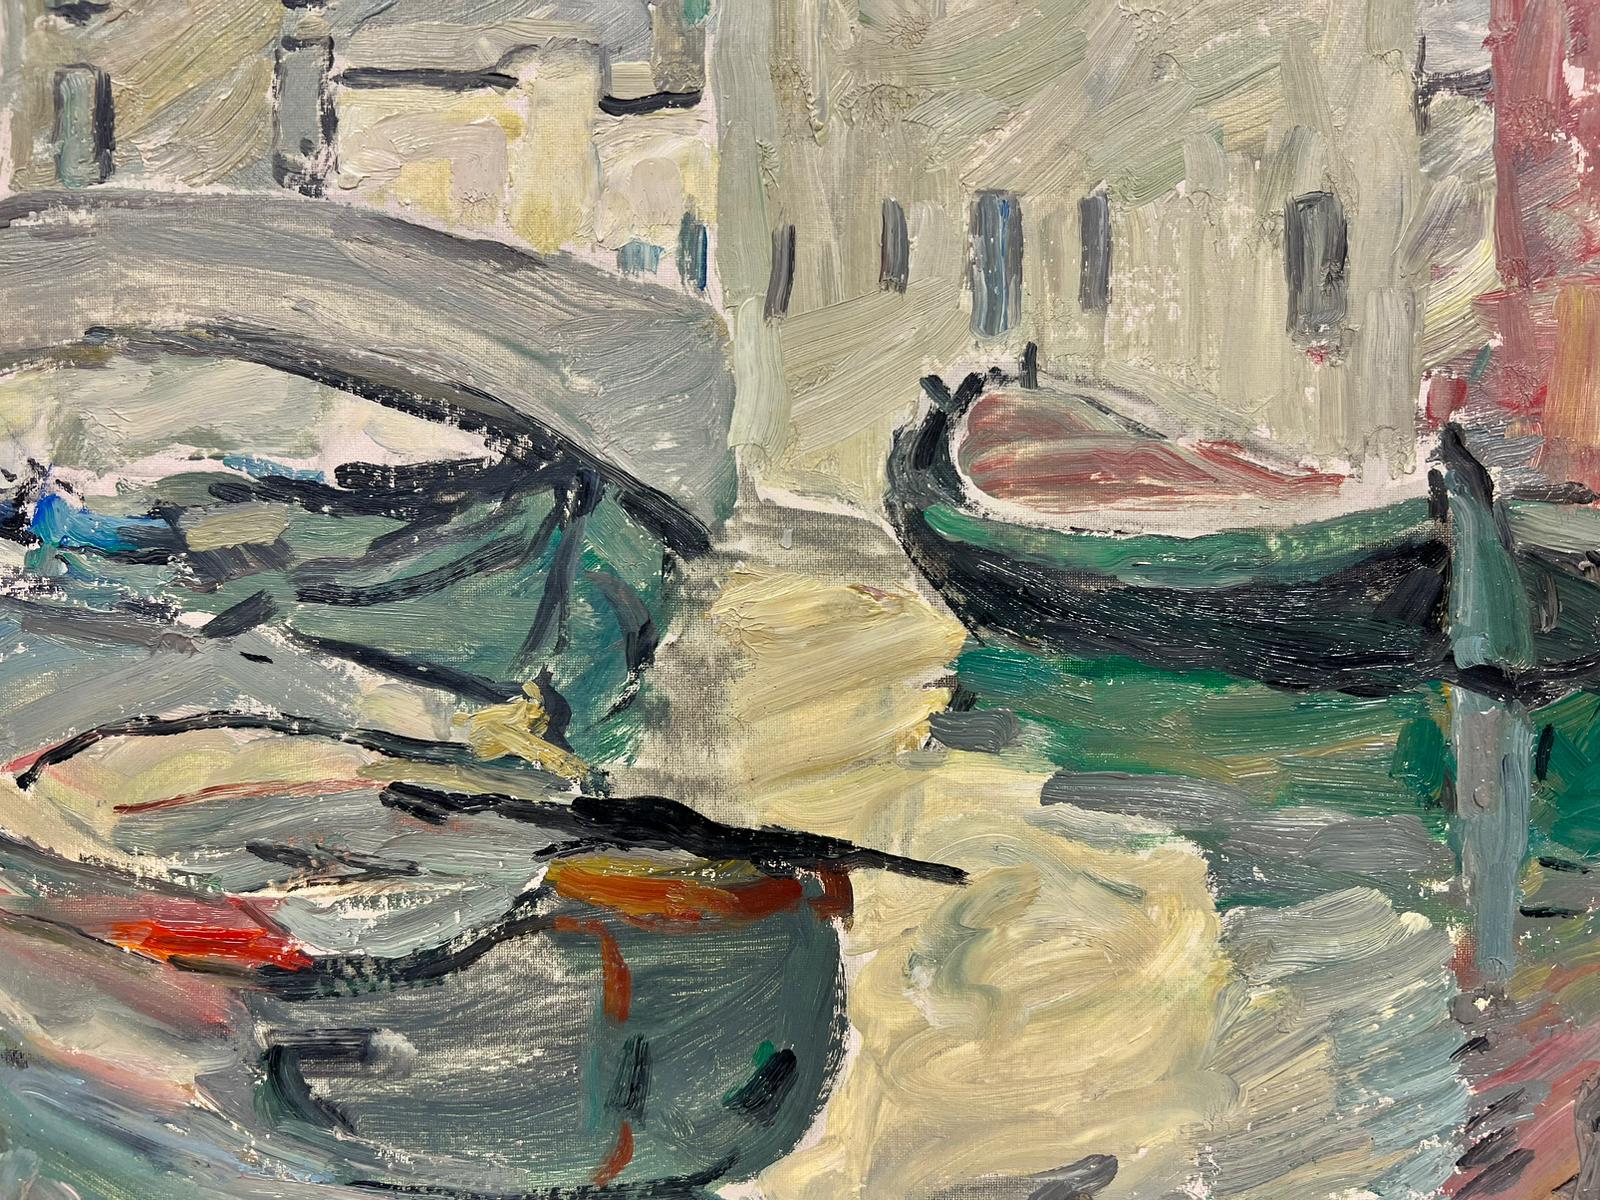 Artist/ School: Suzanne Dinkés (French, 1895 - 1984), signed

Title: Beautiful Venice canal scene, very atmospheric and tranquil. 

Medium: oil on board, unframed

Size : 13 x 16 inches

Colors: Grey colors, yellow, cream, green and blue tones.